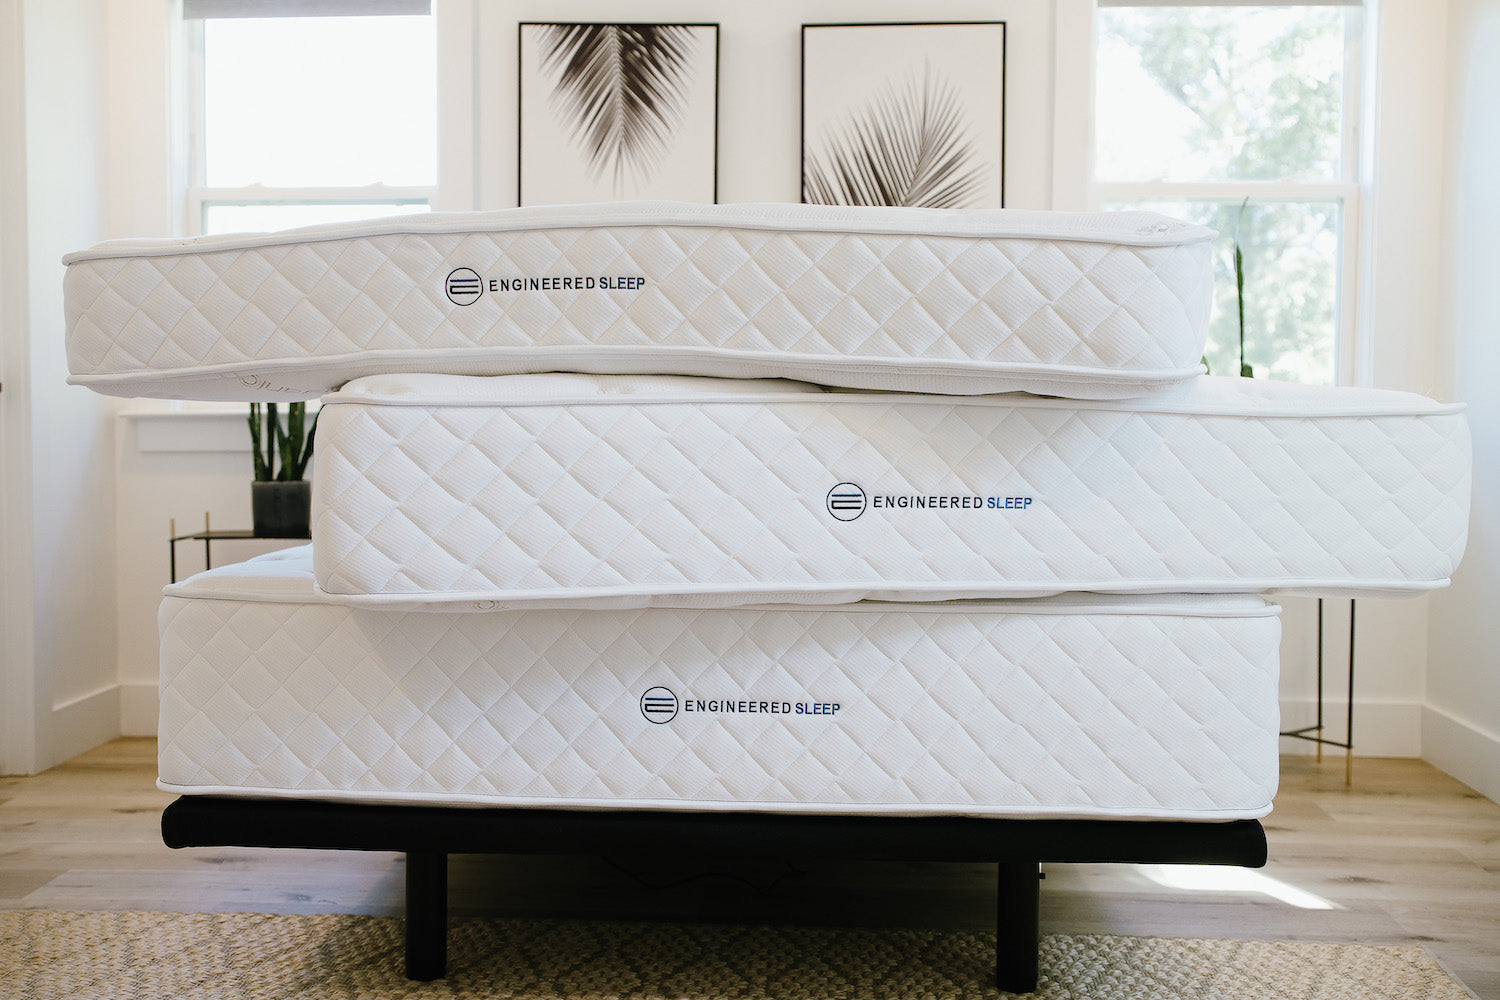 all our Classic Hybrid mattresses stacked on each other to showcases the different mattress options. These are traditional, flippable or double-sided mattresses.